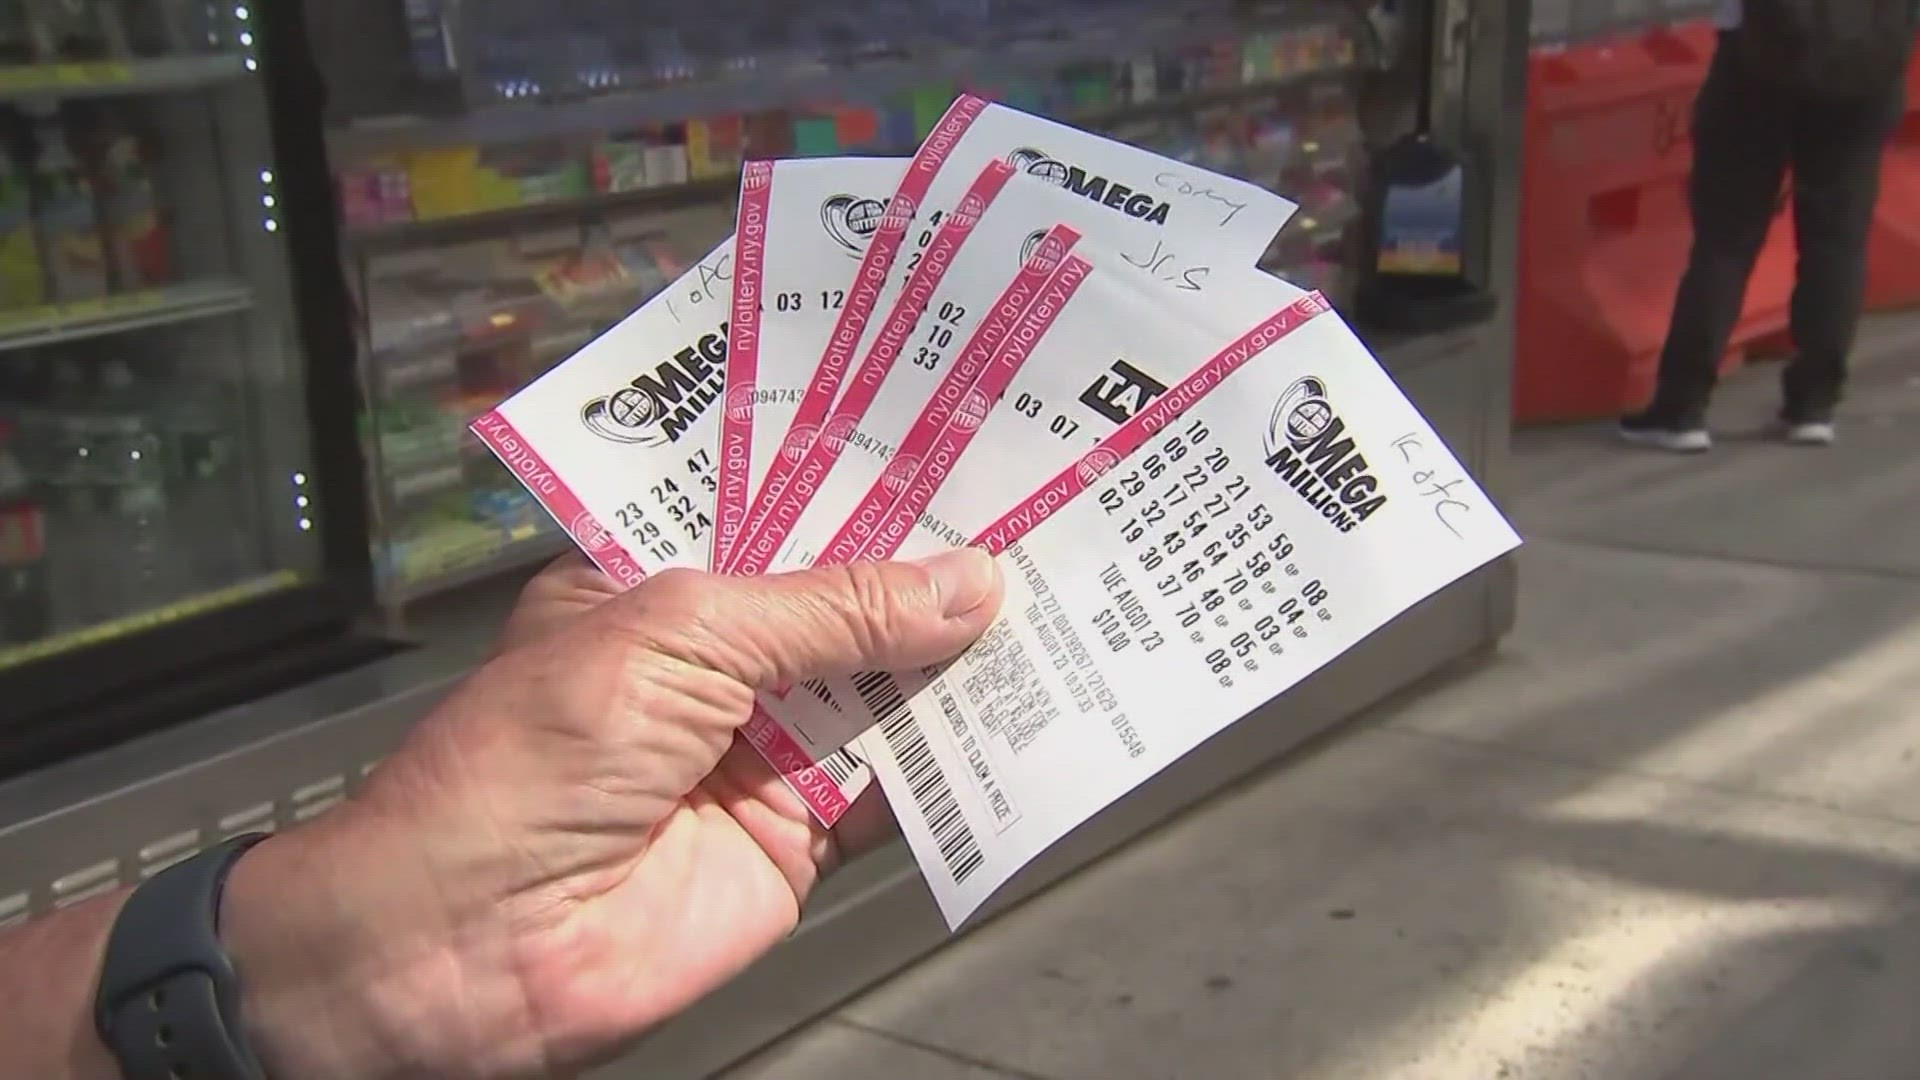 The Mega Millions jackpot now climbs to $977 million, which features a cash option worth $461 million. The next drawing will take place on Friday, March 22.